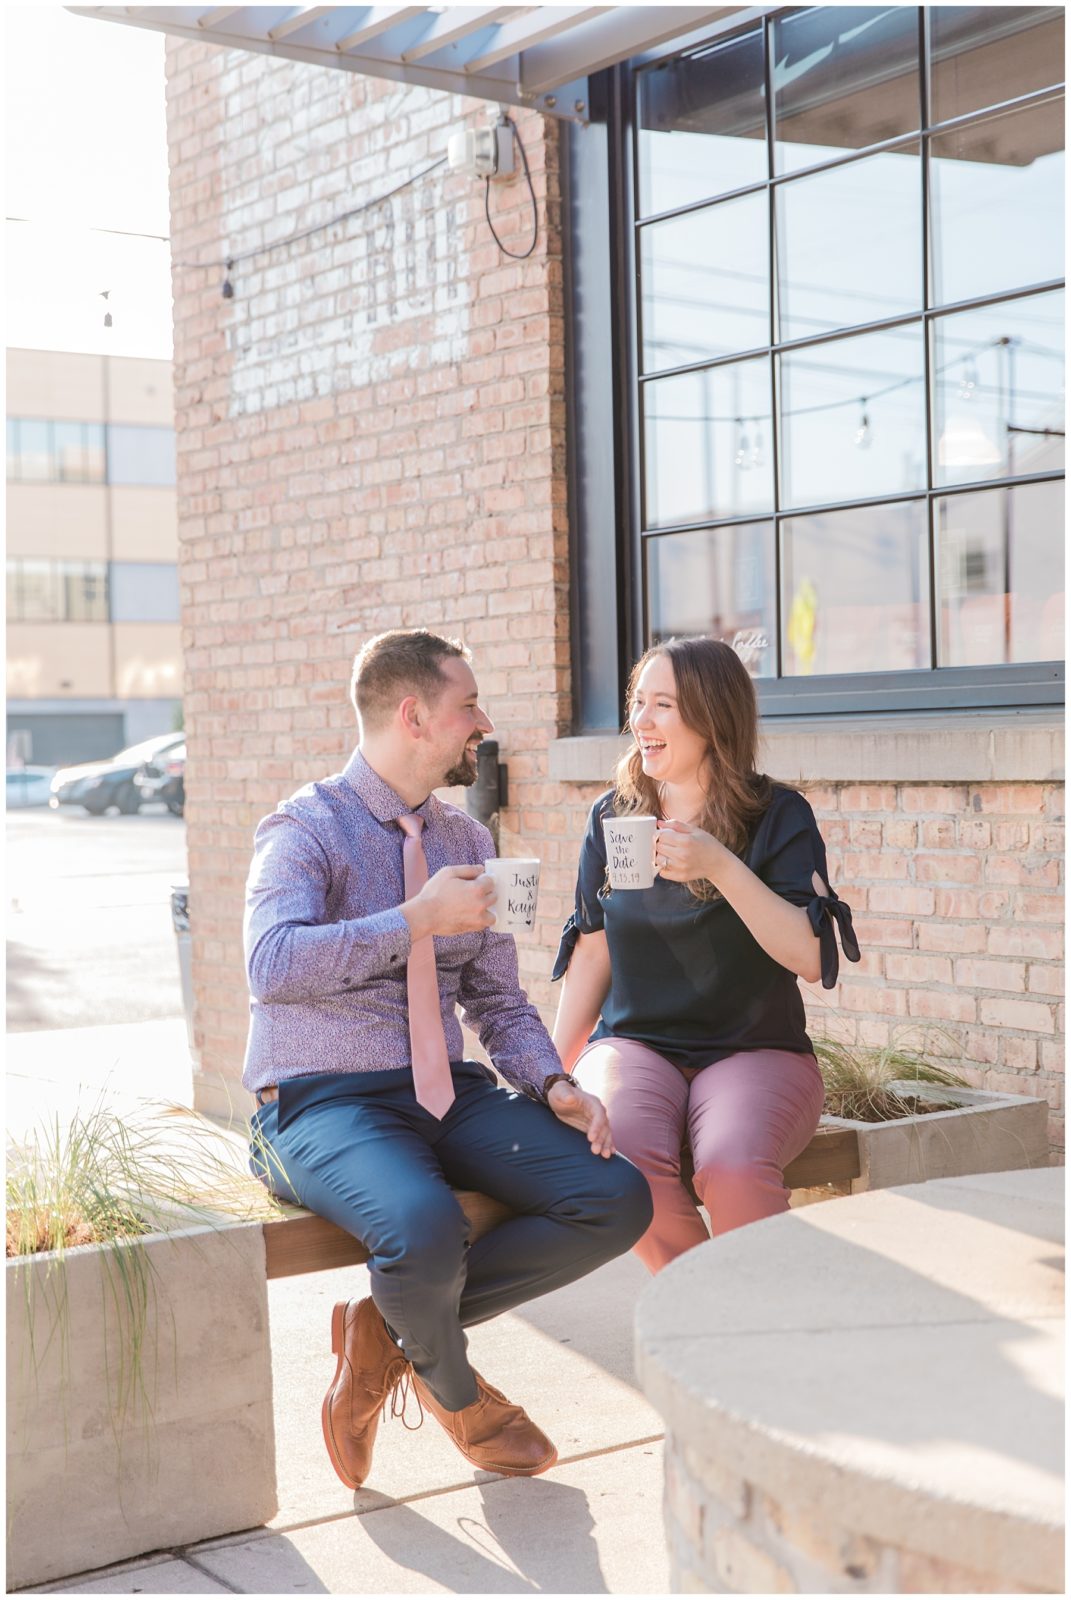 ENGAGEMENT SESSION ON MILWAUKEE RIVERWALK | HAPPY TAKES PHOTOGRAPHY